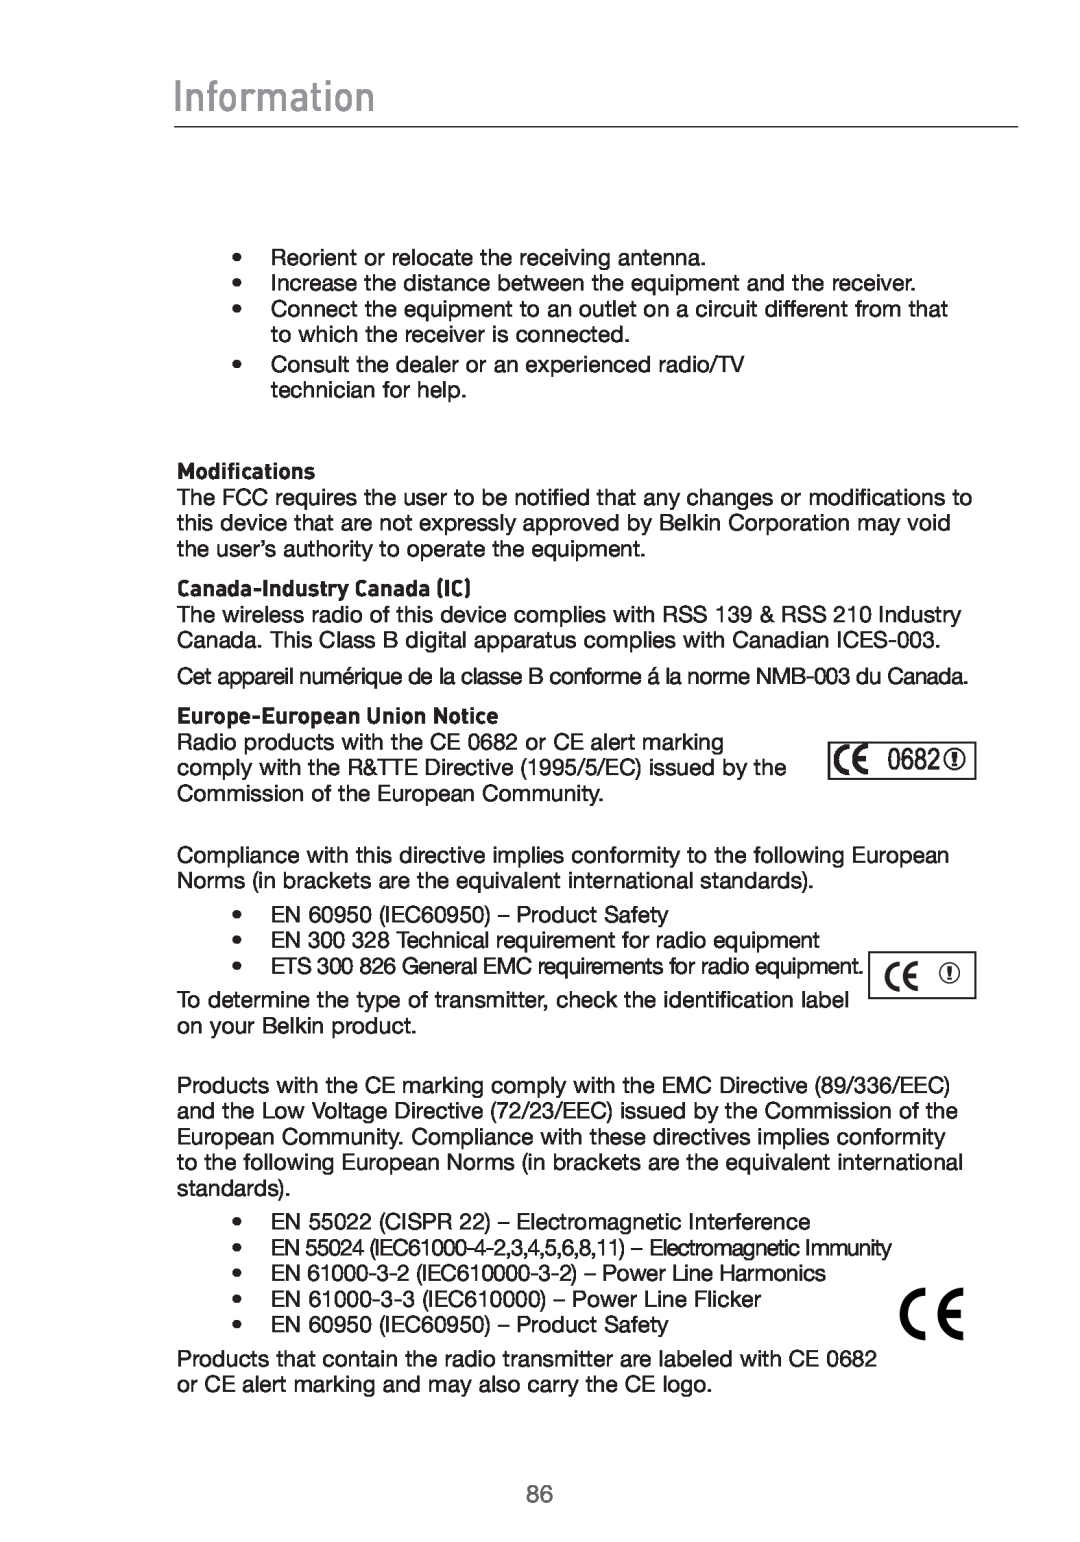 Belkin F5D7632UK4 user manual Information, Modifications, Canada-Industry Canada IC, Europe-European Union Notice 